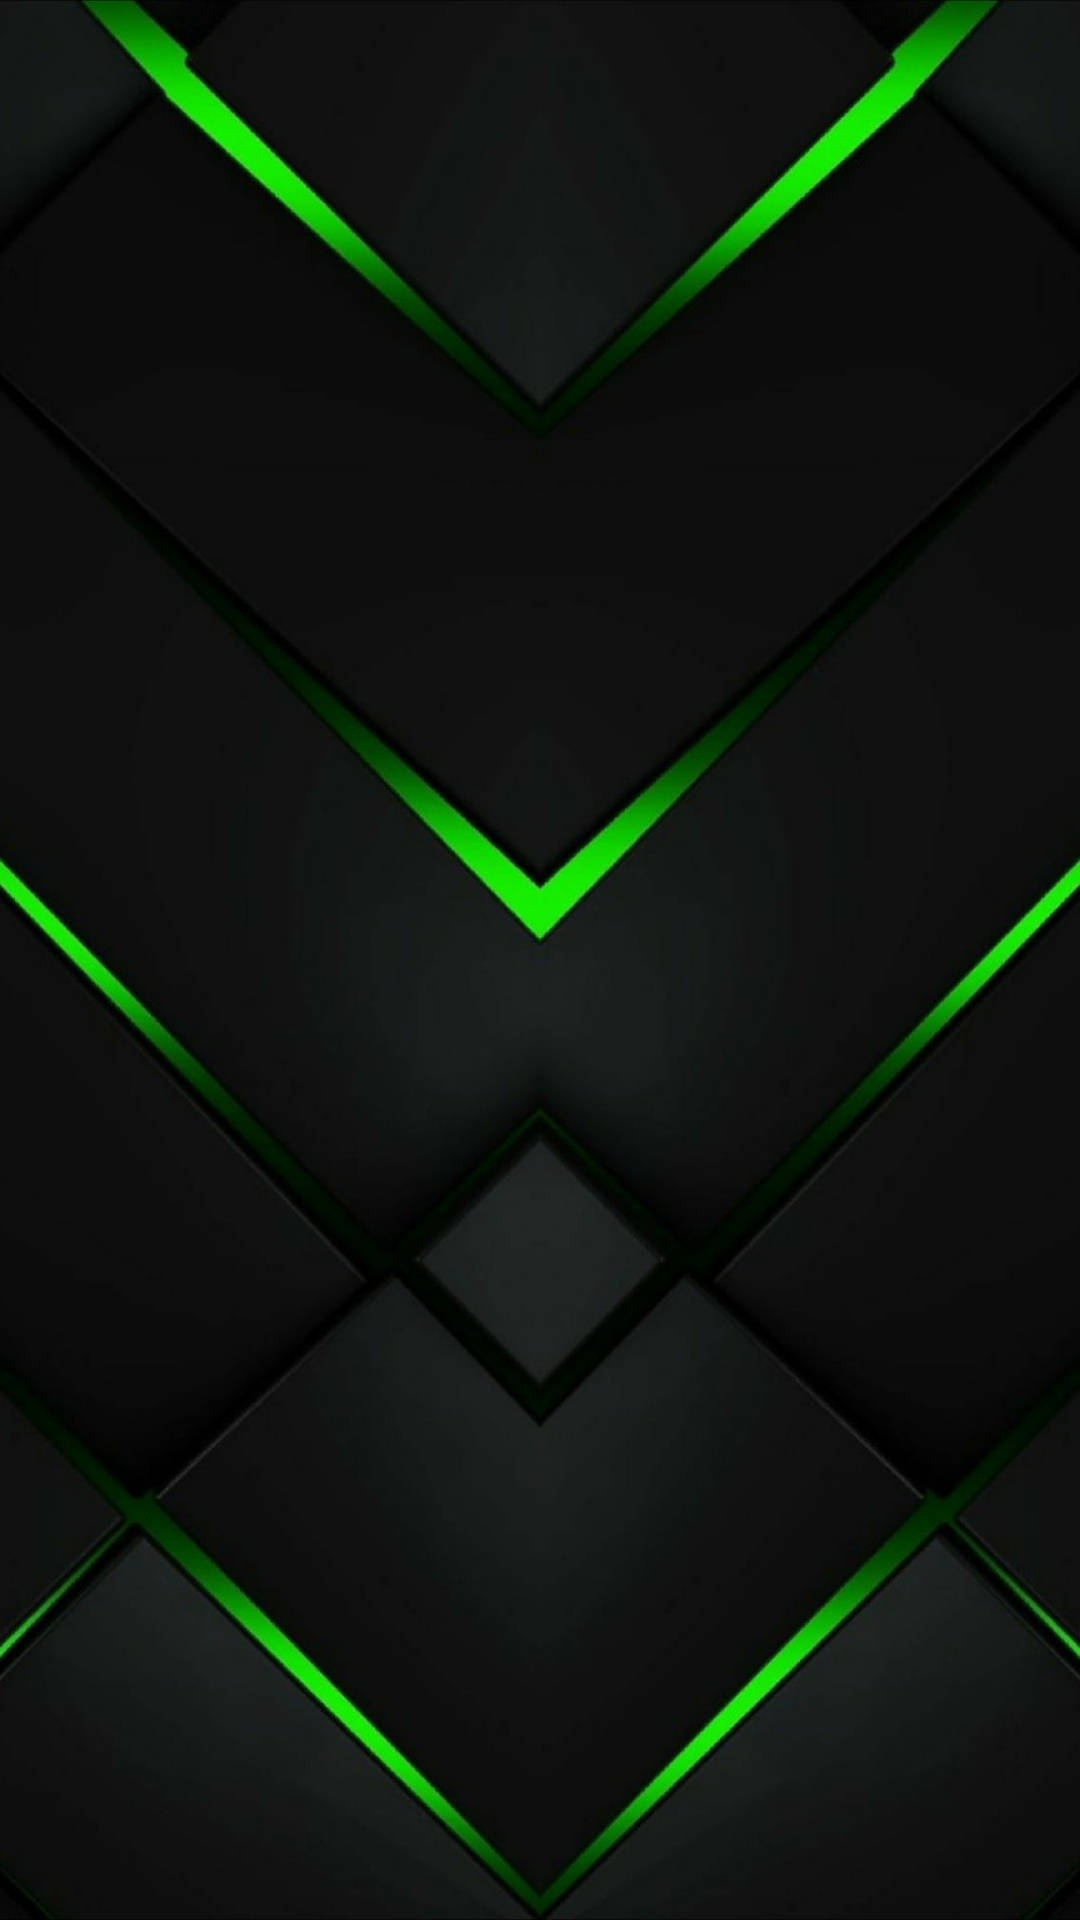 Black And Green Abstract Chevrons Background